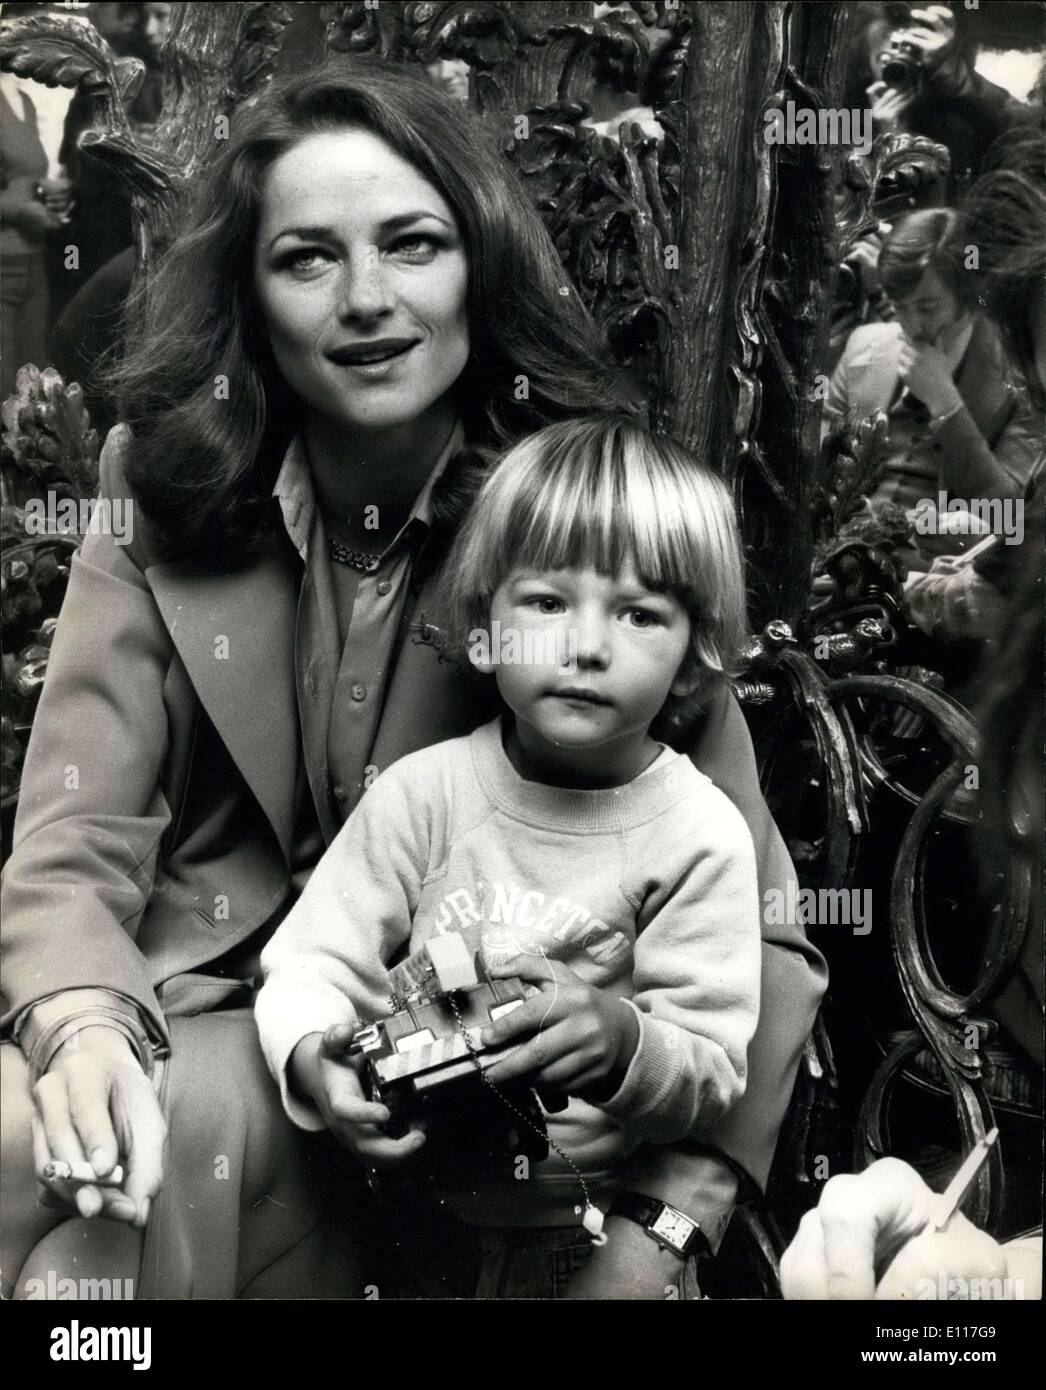 Mar. 08, 1976 - Charlotte Rampling Is Quitting Films For A Year To Have A Baby Actress Charlotte Rampling returned to London - and immediately announced a year off from filming. 30-year-old Charlotte, whose latest picture ''Farewell My Lovely'' is another box office success, already has a 3-year-old son Barnaby, but says Charlotte ''I don't like the idea of an only child, I want a bigger family''. Her husband Bryan Southcombe, who is also her business adviser, agrees. Photo Shows:- Actress Charlotte Rampling and her 3-year-old son, Barnaby, pictured at the Dorchester Hotel in London. Stock Photo